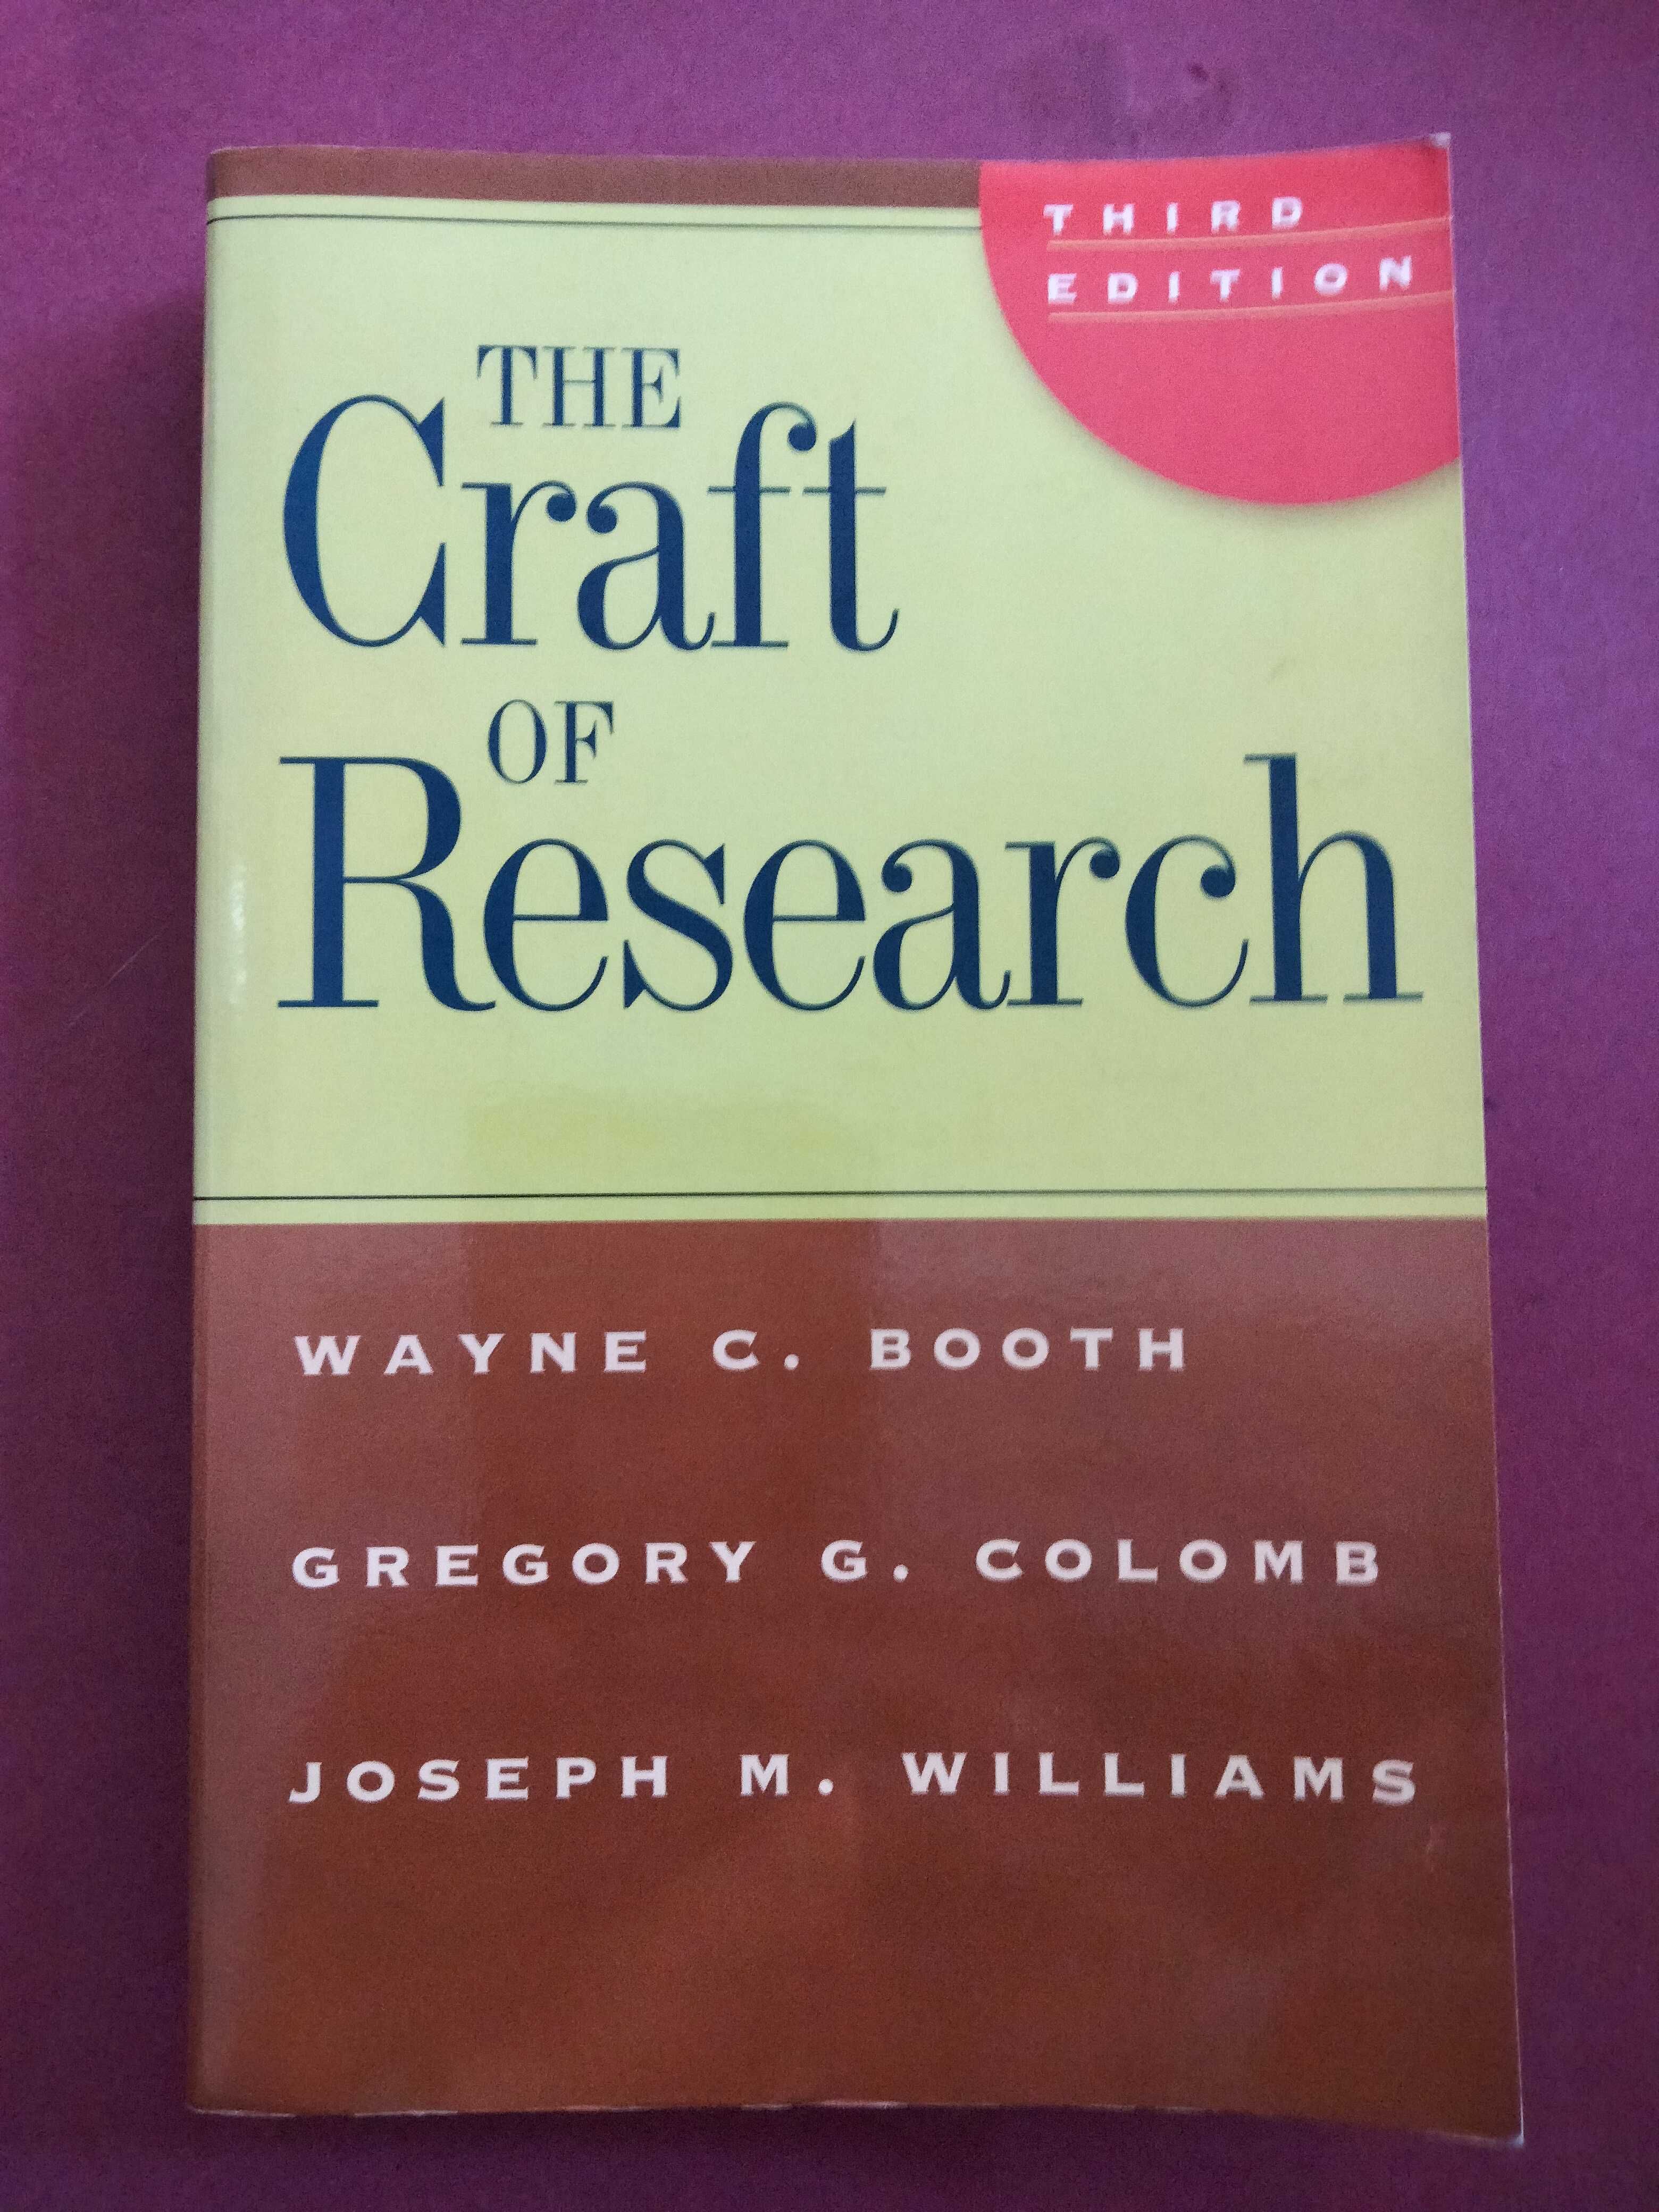 The Craft of Research - Wayne C. Booth